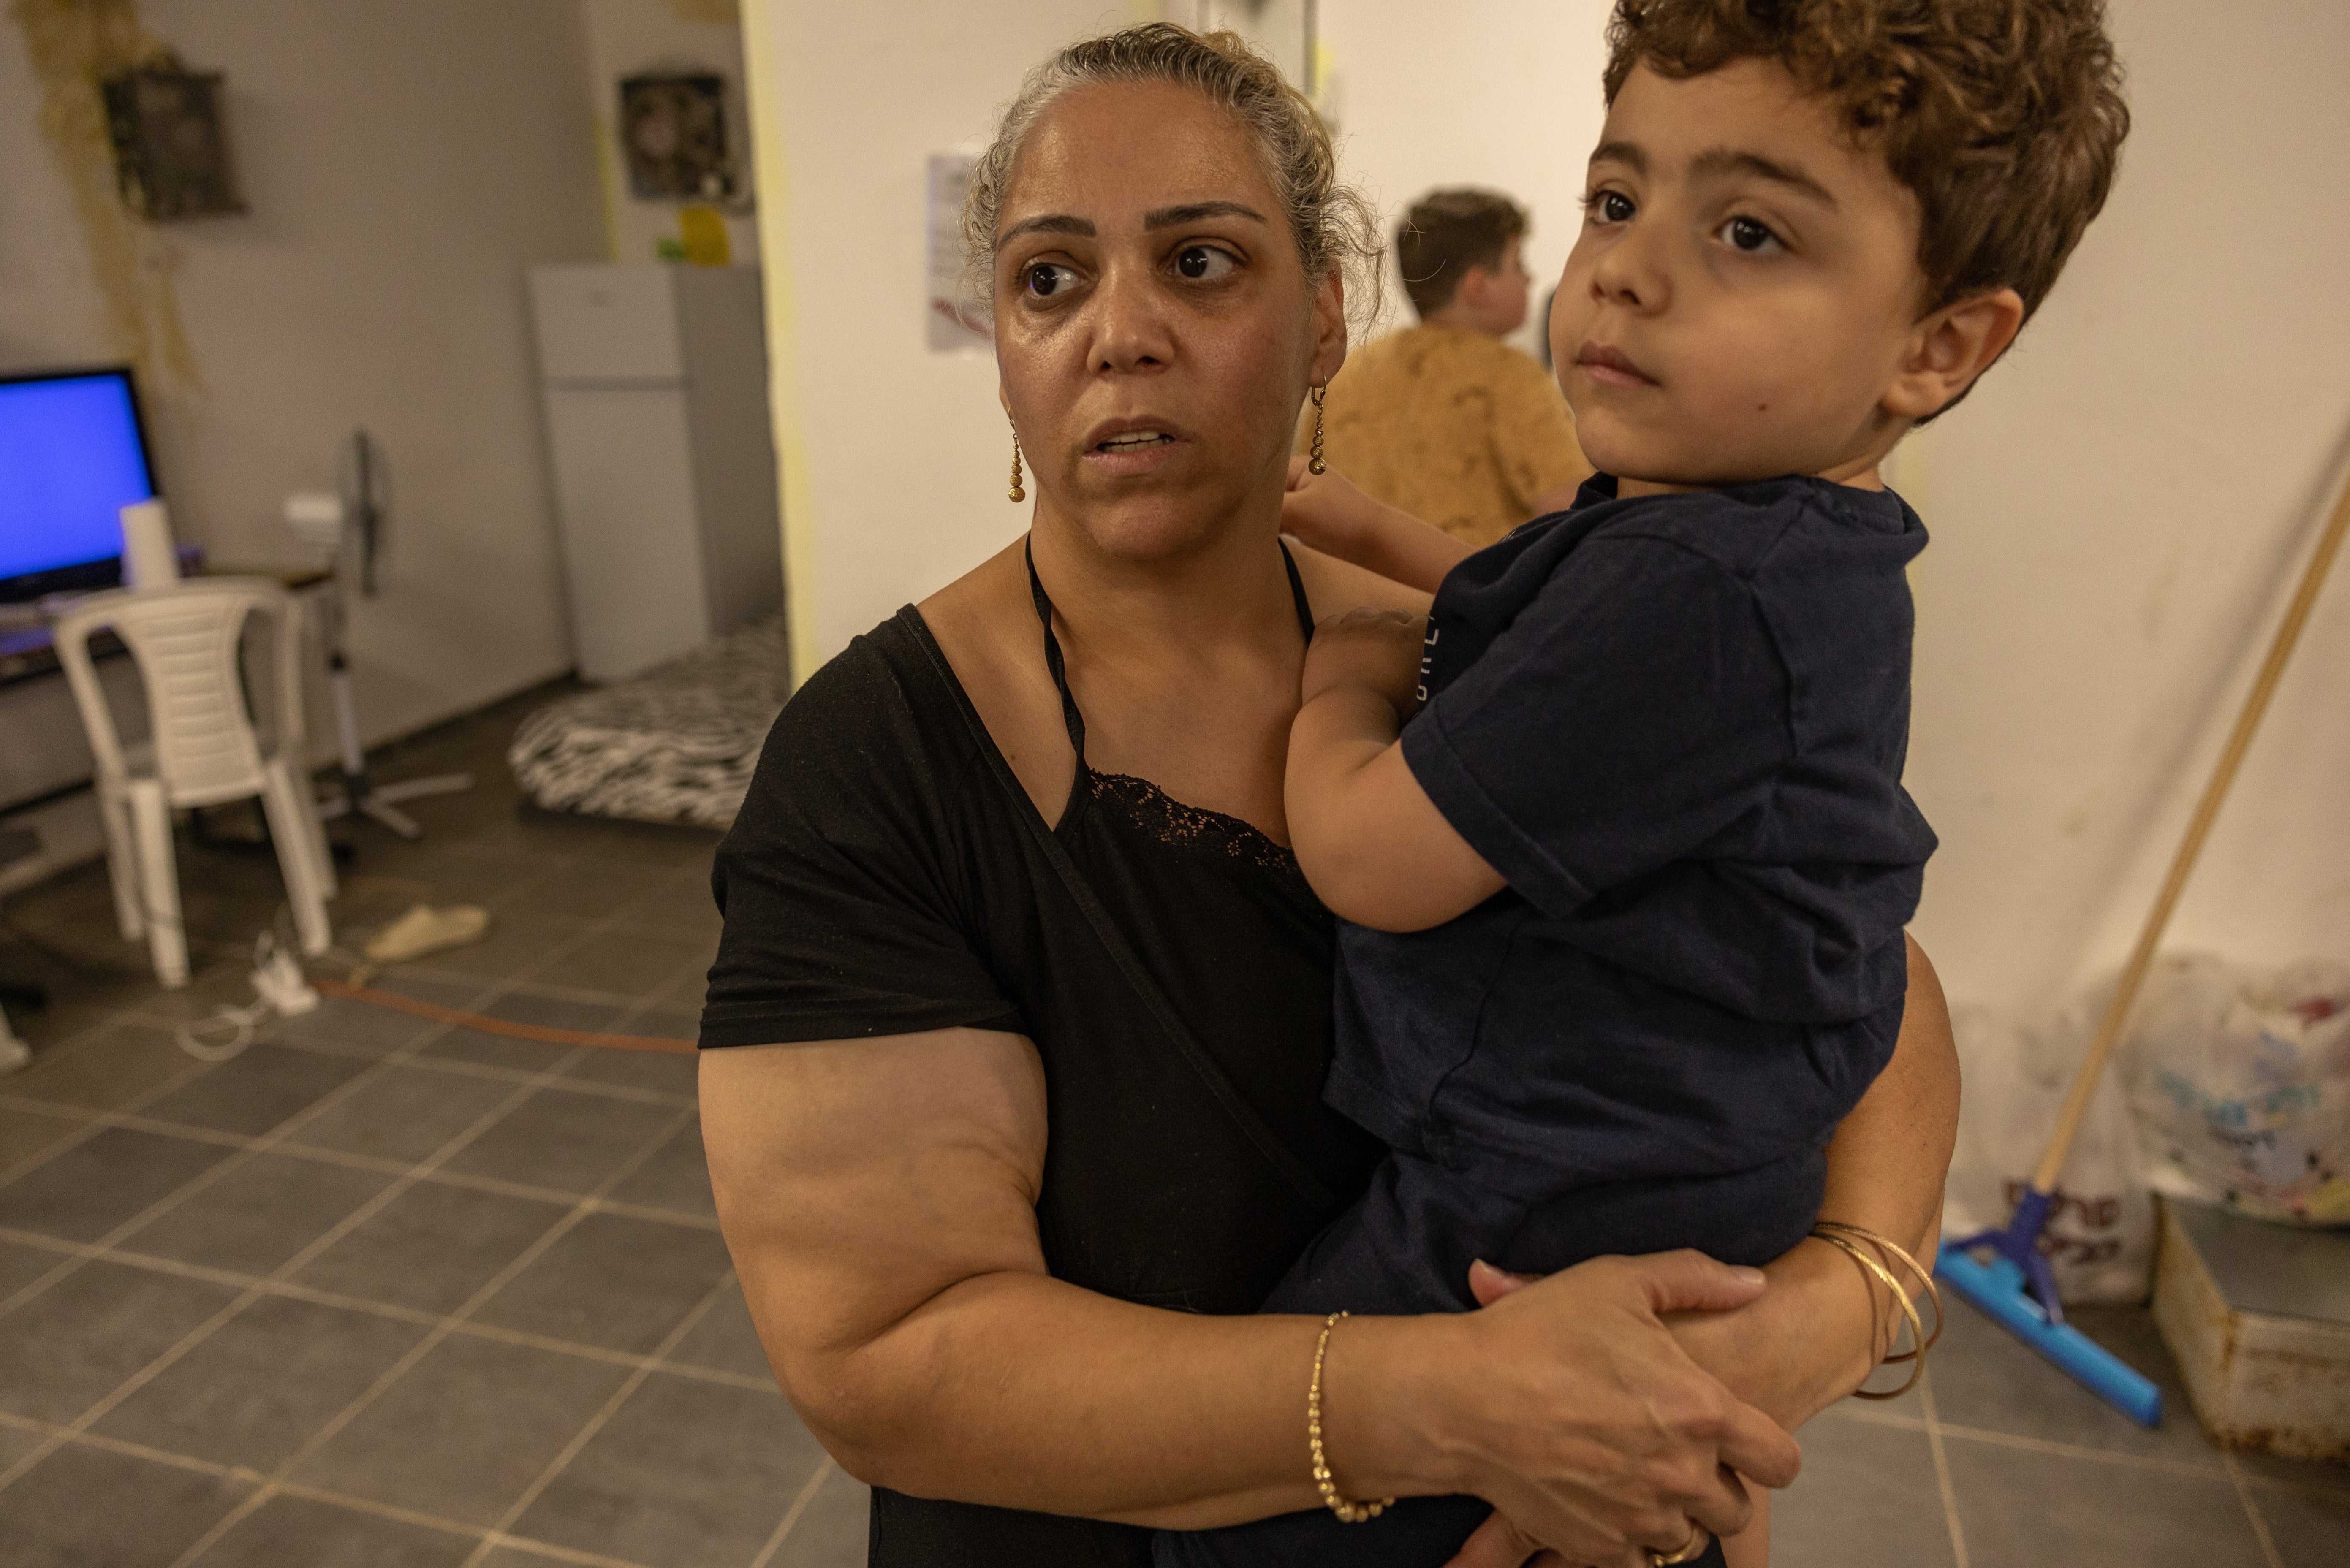 Mother-of-three Efrat Peretz, 43, with her son